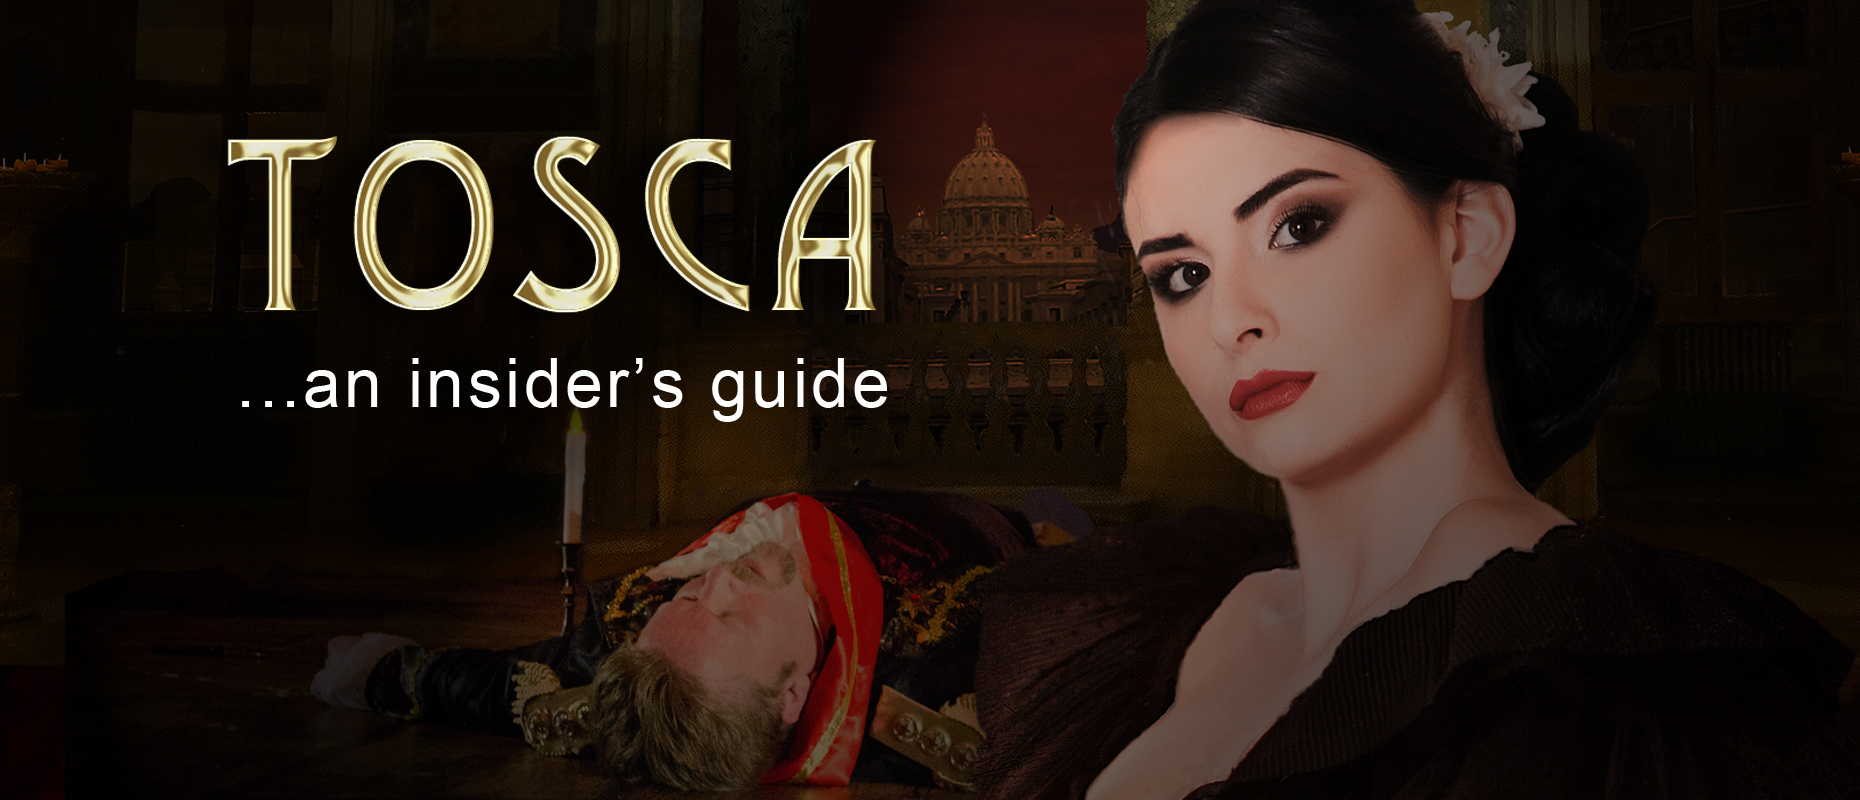 Tosca...an insider's guide